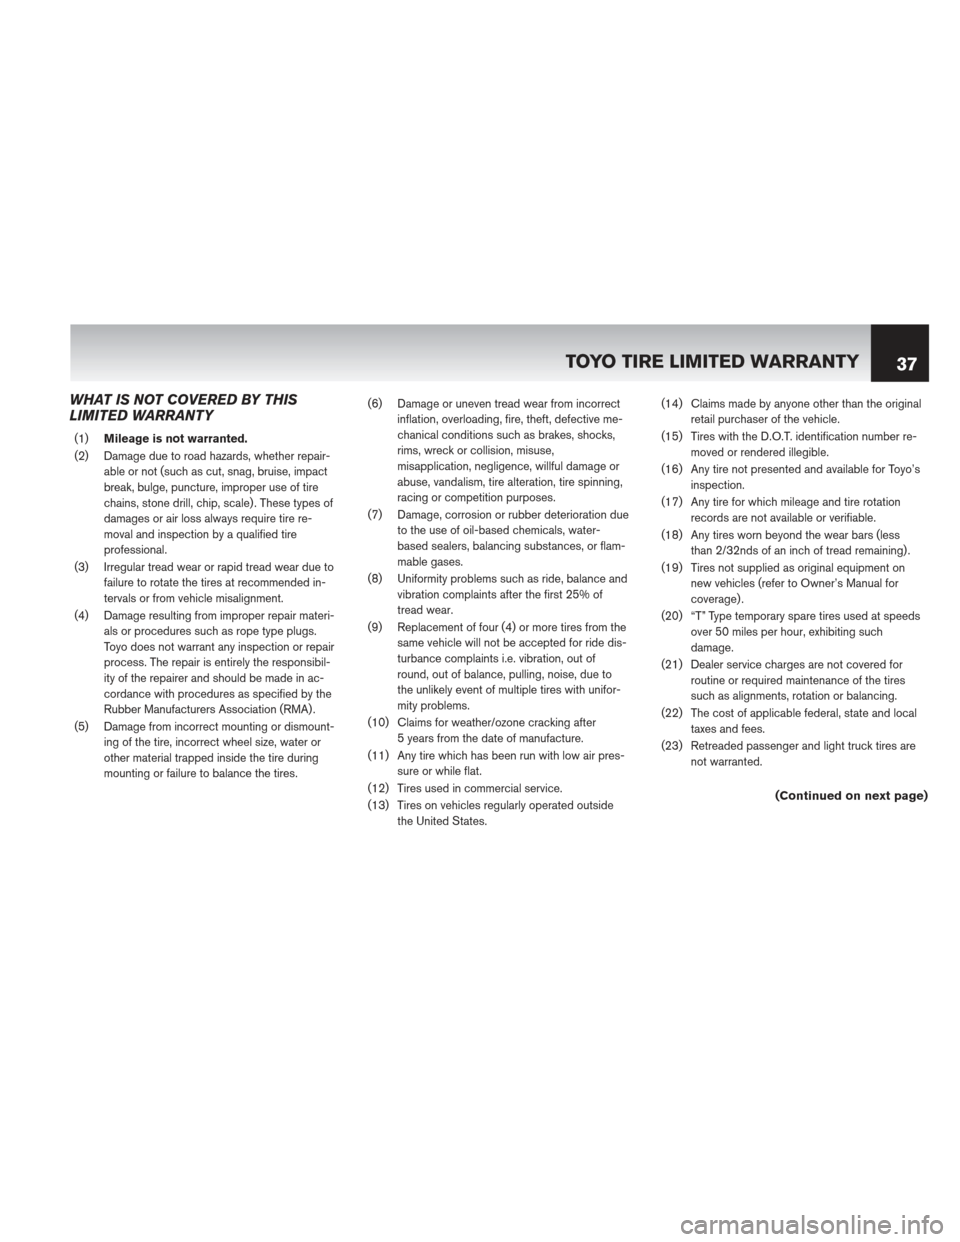 NISSAN MURANO 2013 2.G Warranty Booklet WHAT IS NOT COVERED BY THIS
LIMITED WARRANTY
(1)Mileage is not warranted.
(2) Damage due to road hazards, whether repair- able or not (such as cut, snag, bruise, impact
break, bulge, puncture, imprope